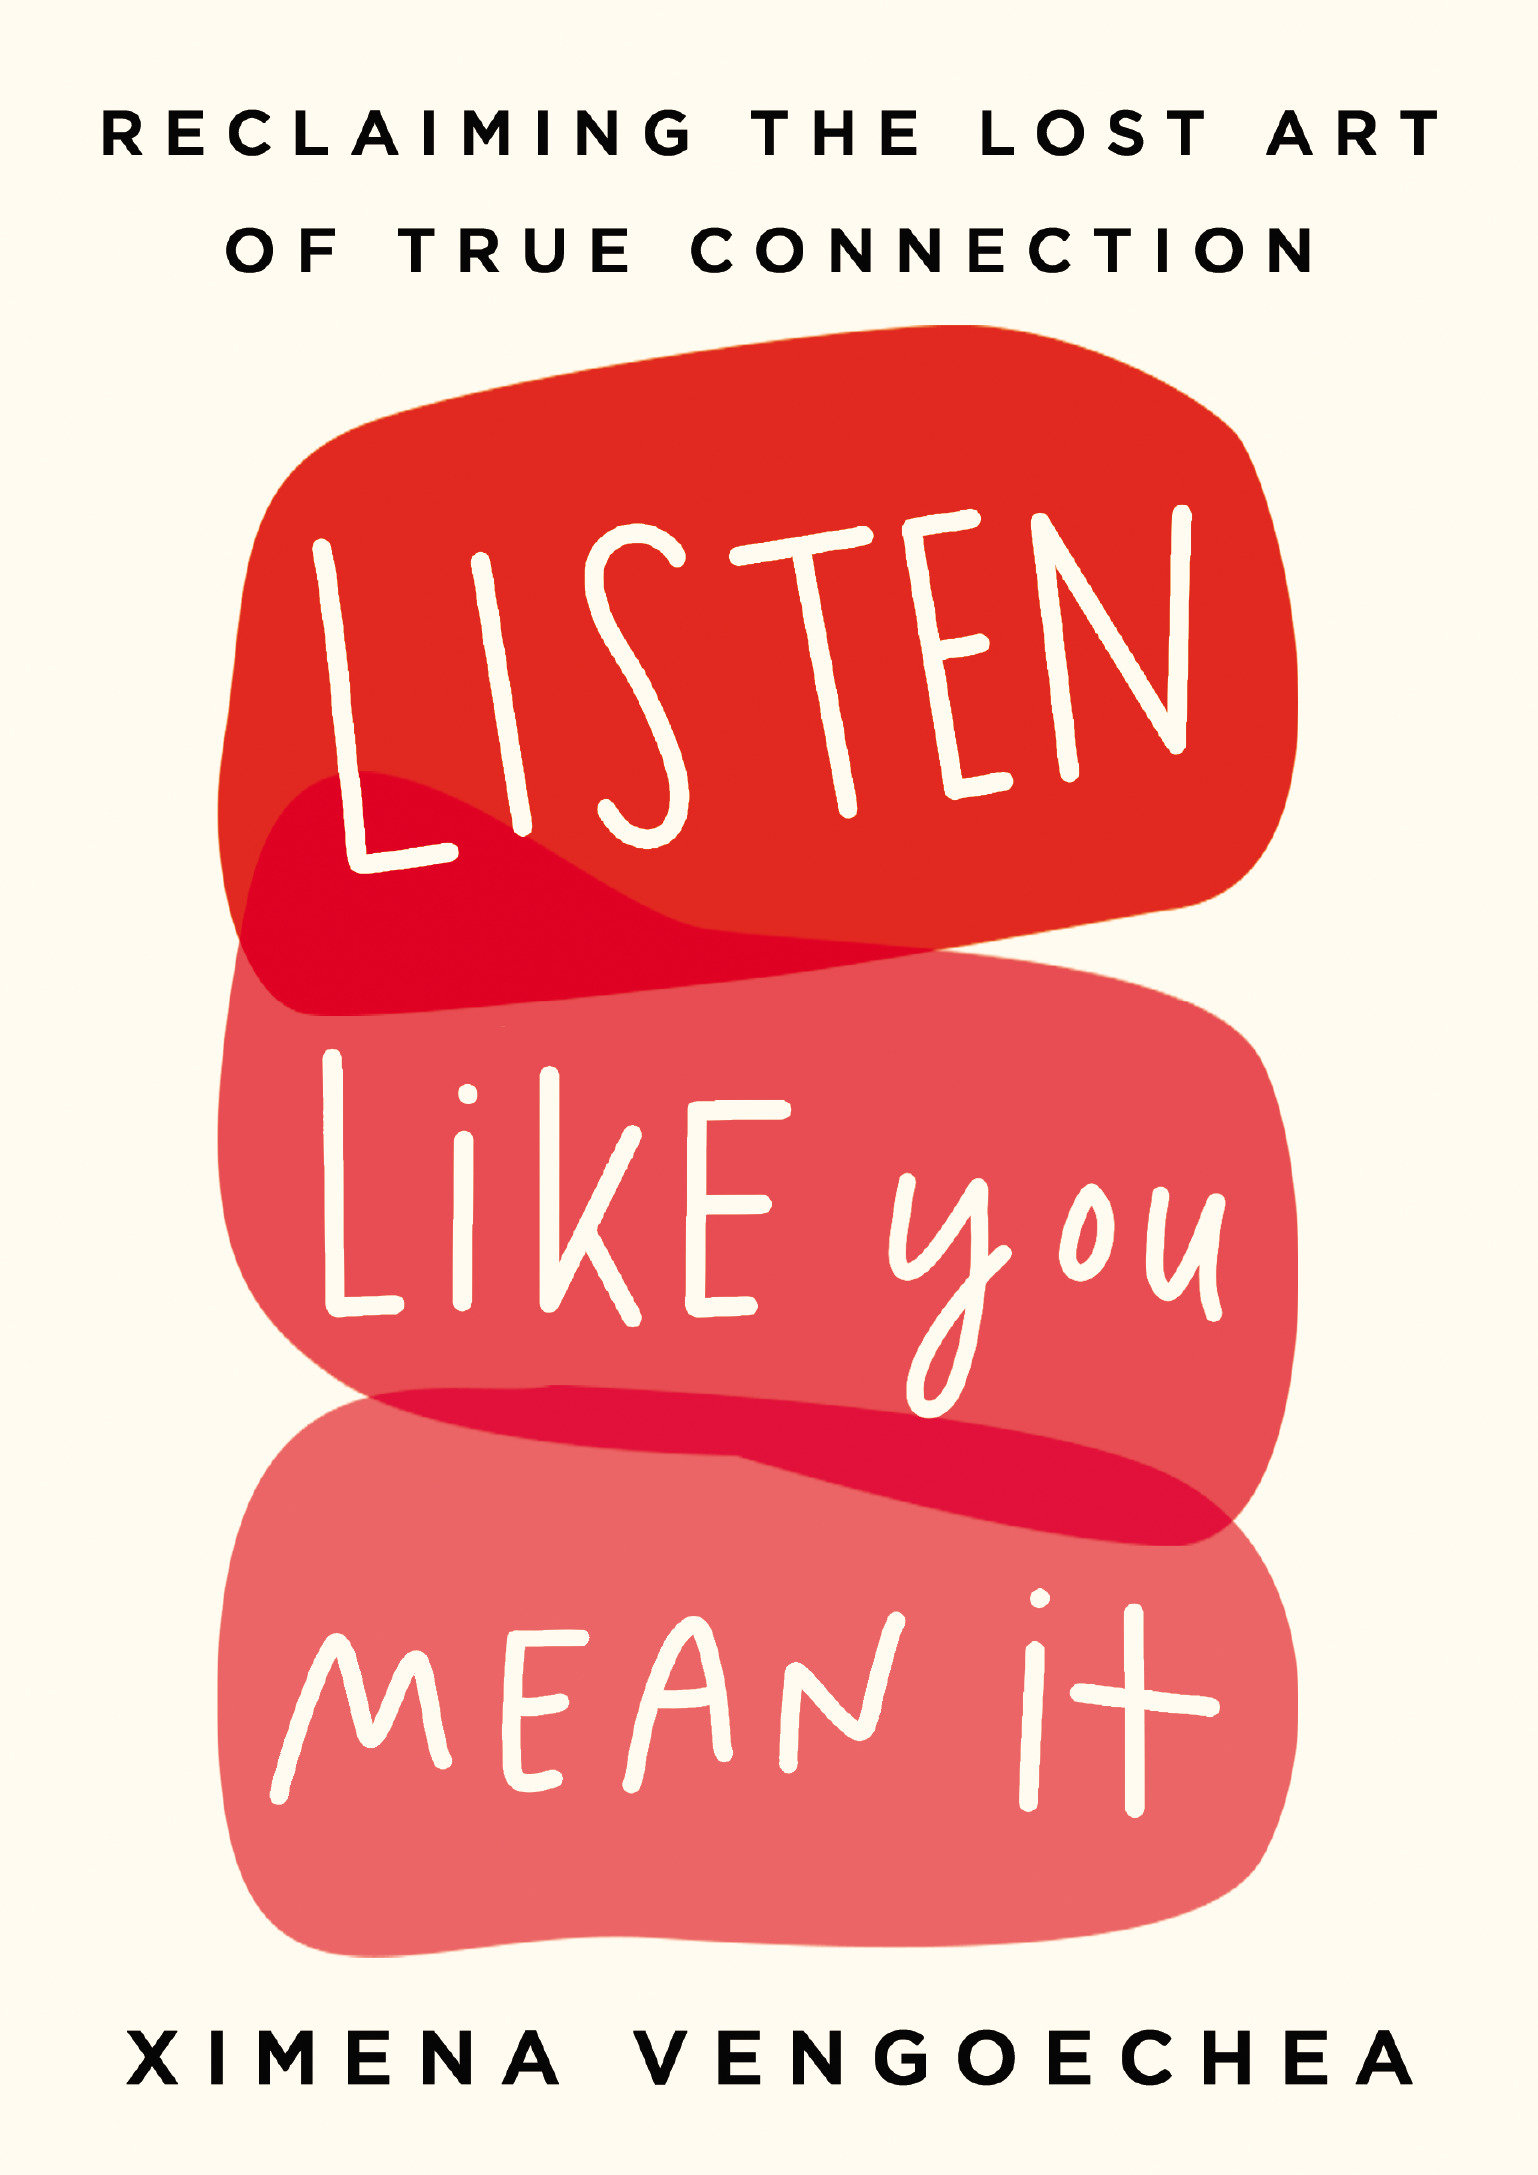 Listen Like You Mean It (Hardcover Book)